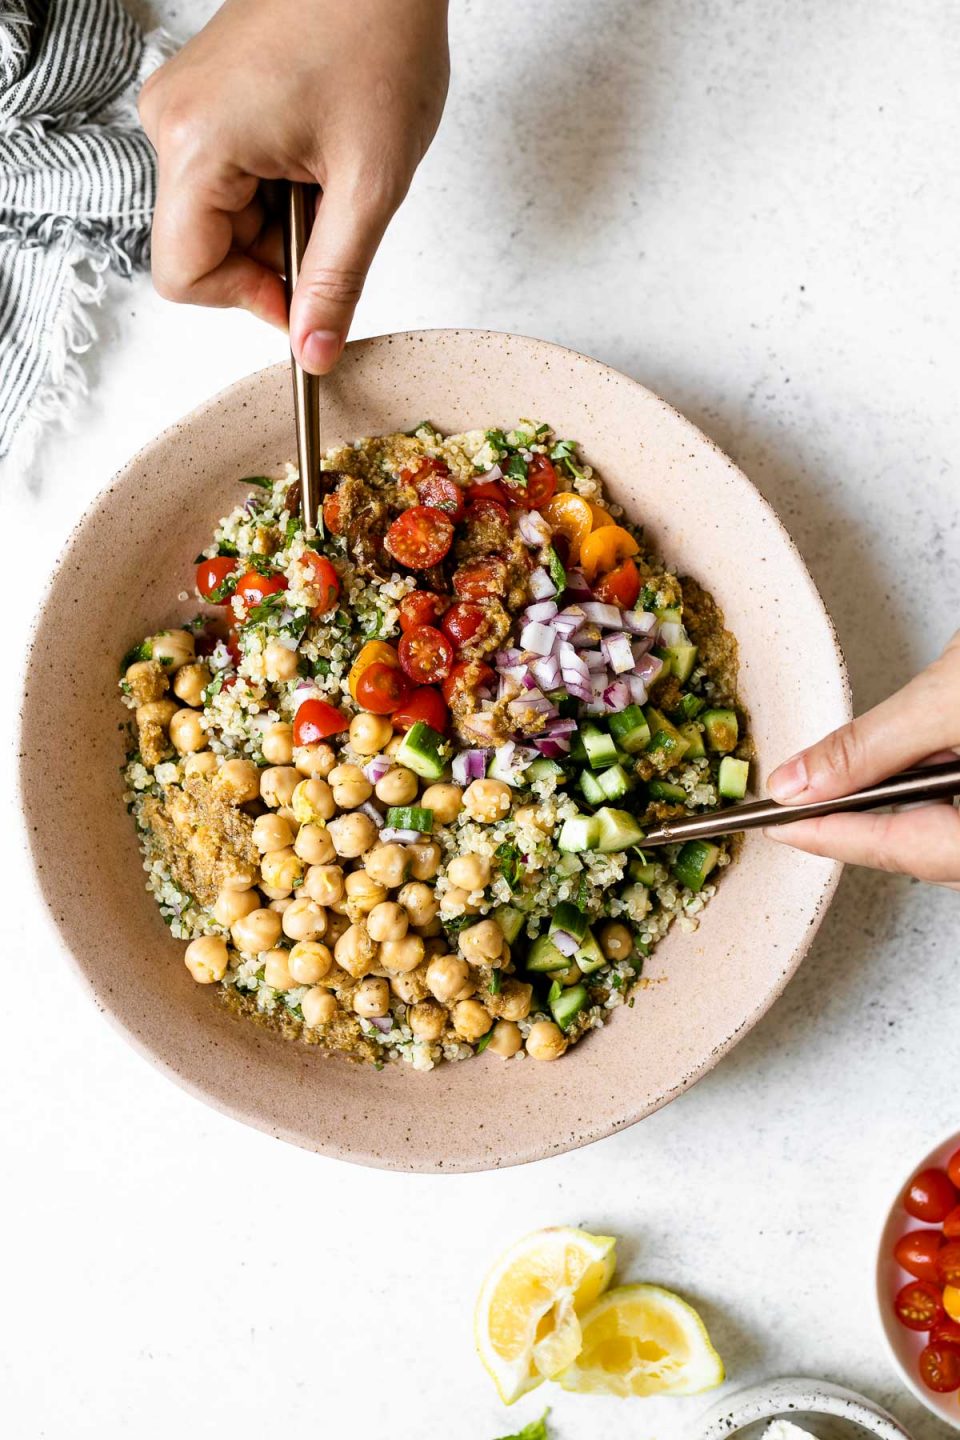 Falafel-ish Quinoa Salad in a large, pink serving bowl. A woman's hands shown tossing the salad with copper serving utensils. The salad bowl is placed on a white surface, & surrounding it are a linen napkin, & some lemon wedges.